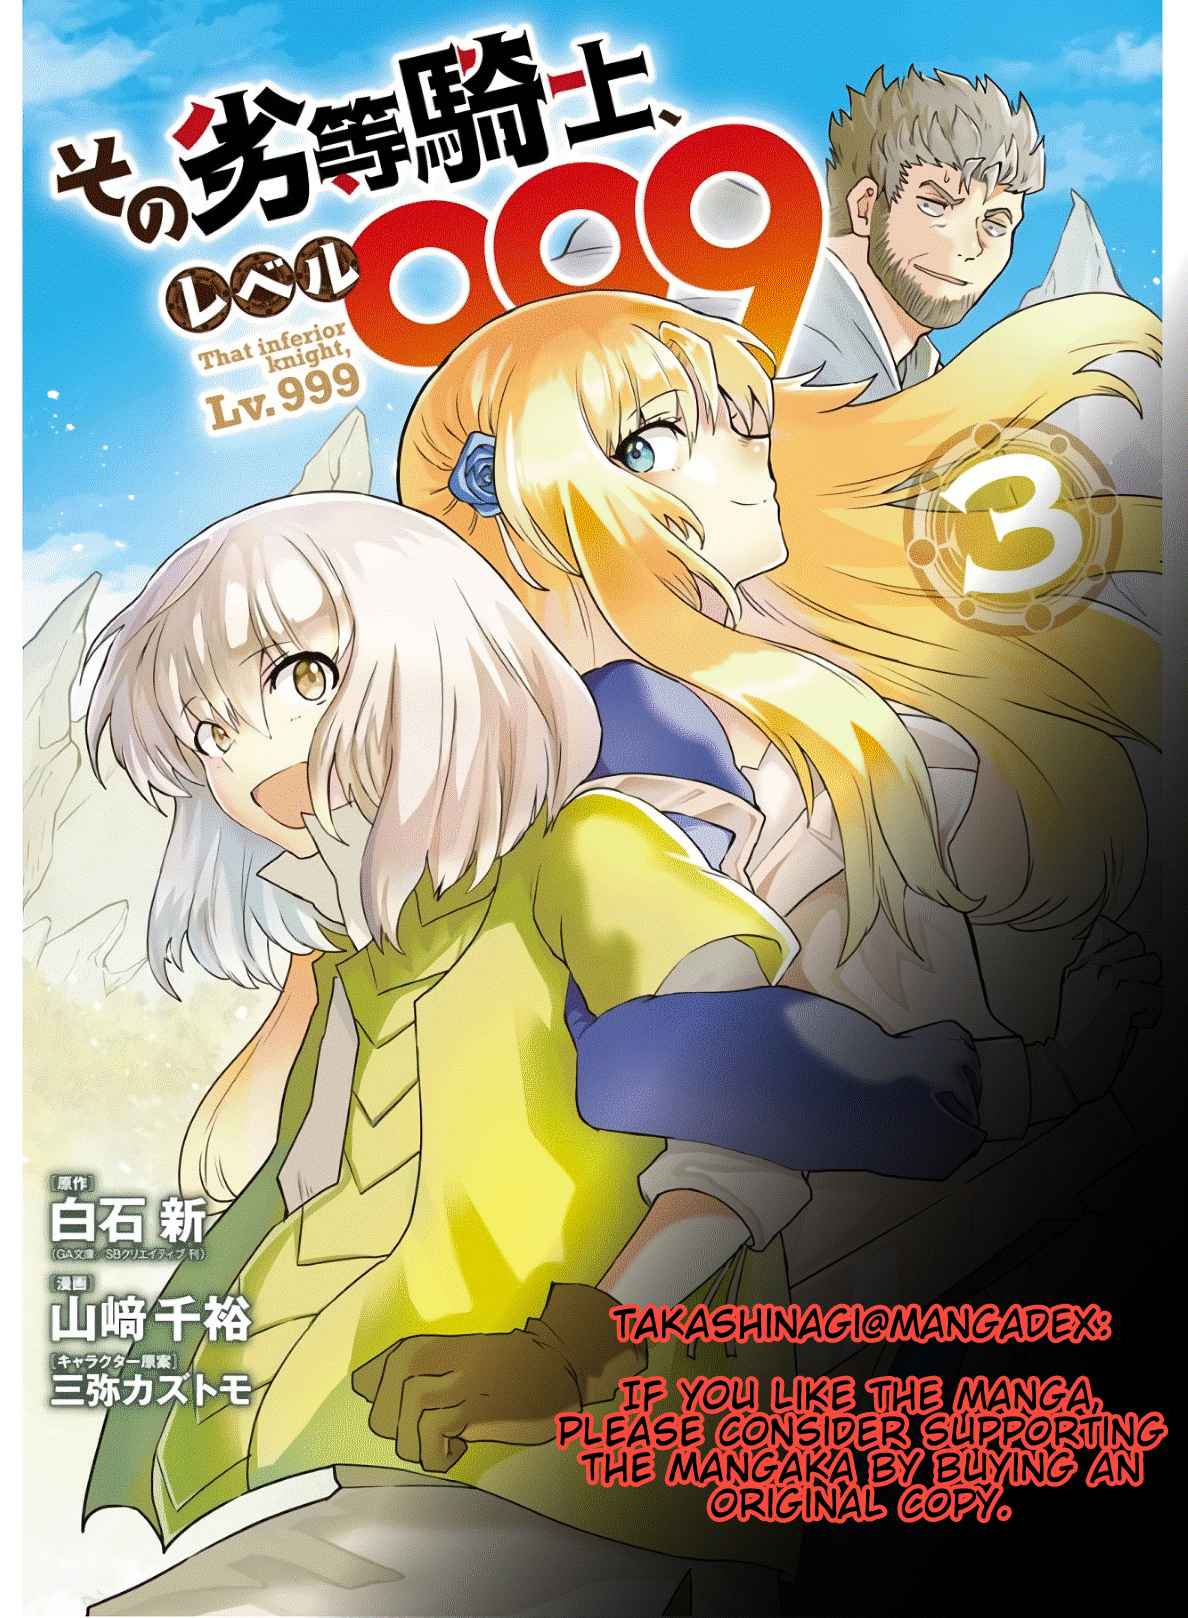 That Inferior Knight, Lv. 999 Ch. 8 That Boy, Rabbit, Inns and Hot Springs.